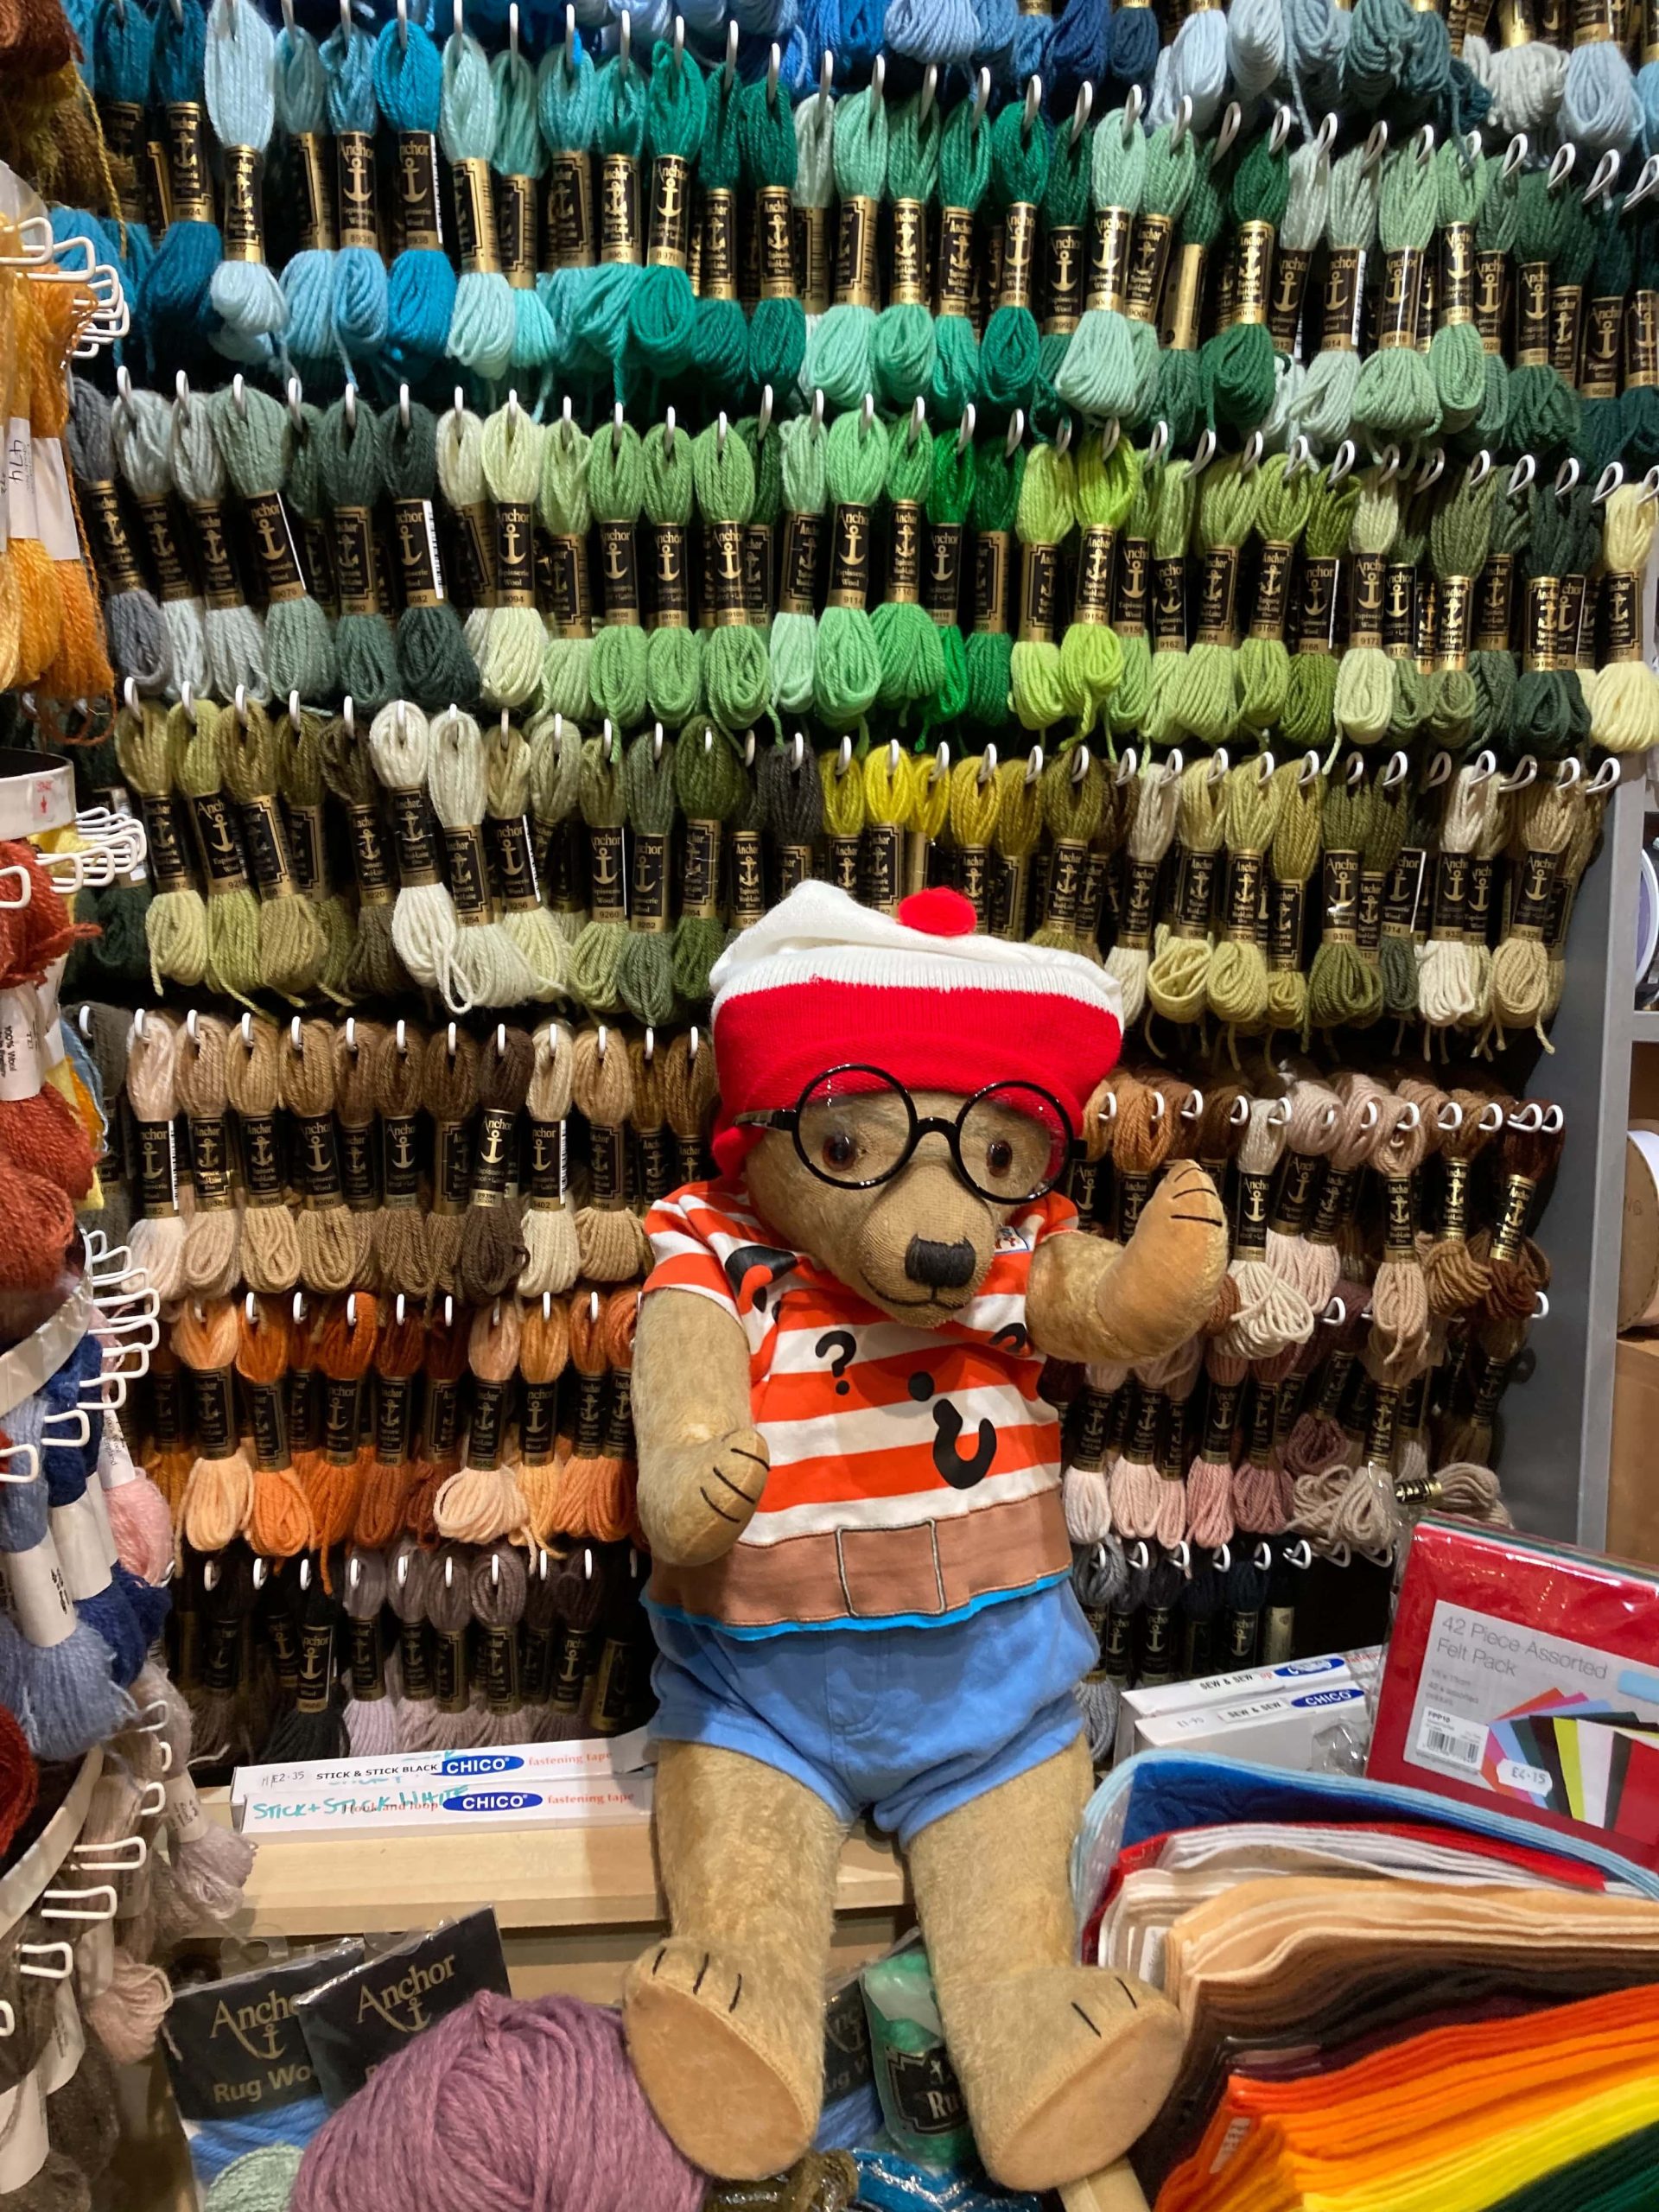 Winifred with a striped hat and shirt sitting in front of racks of wool and next to felt